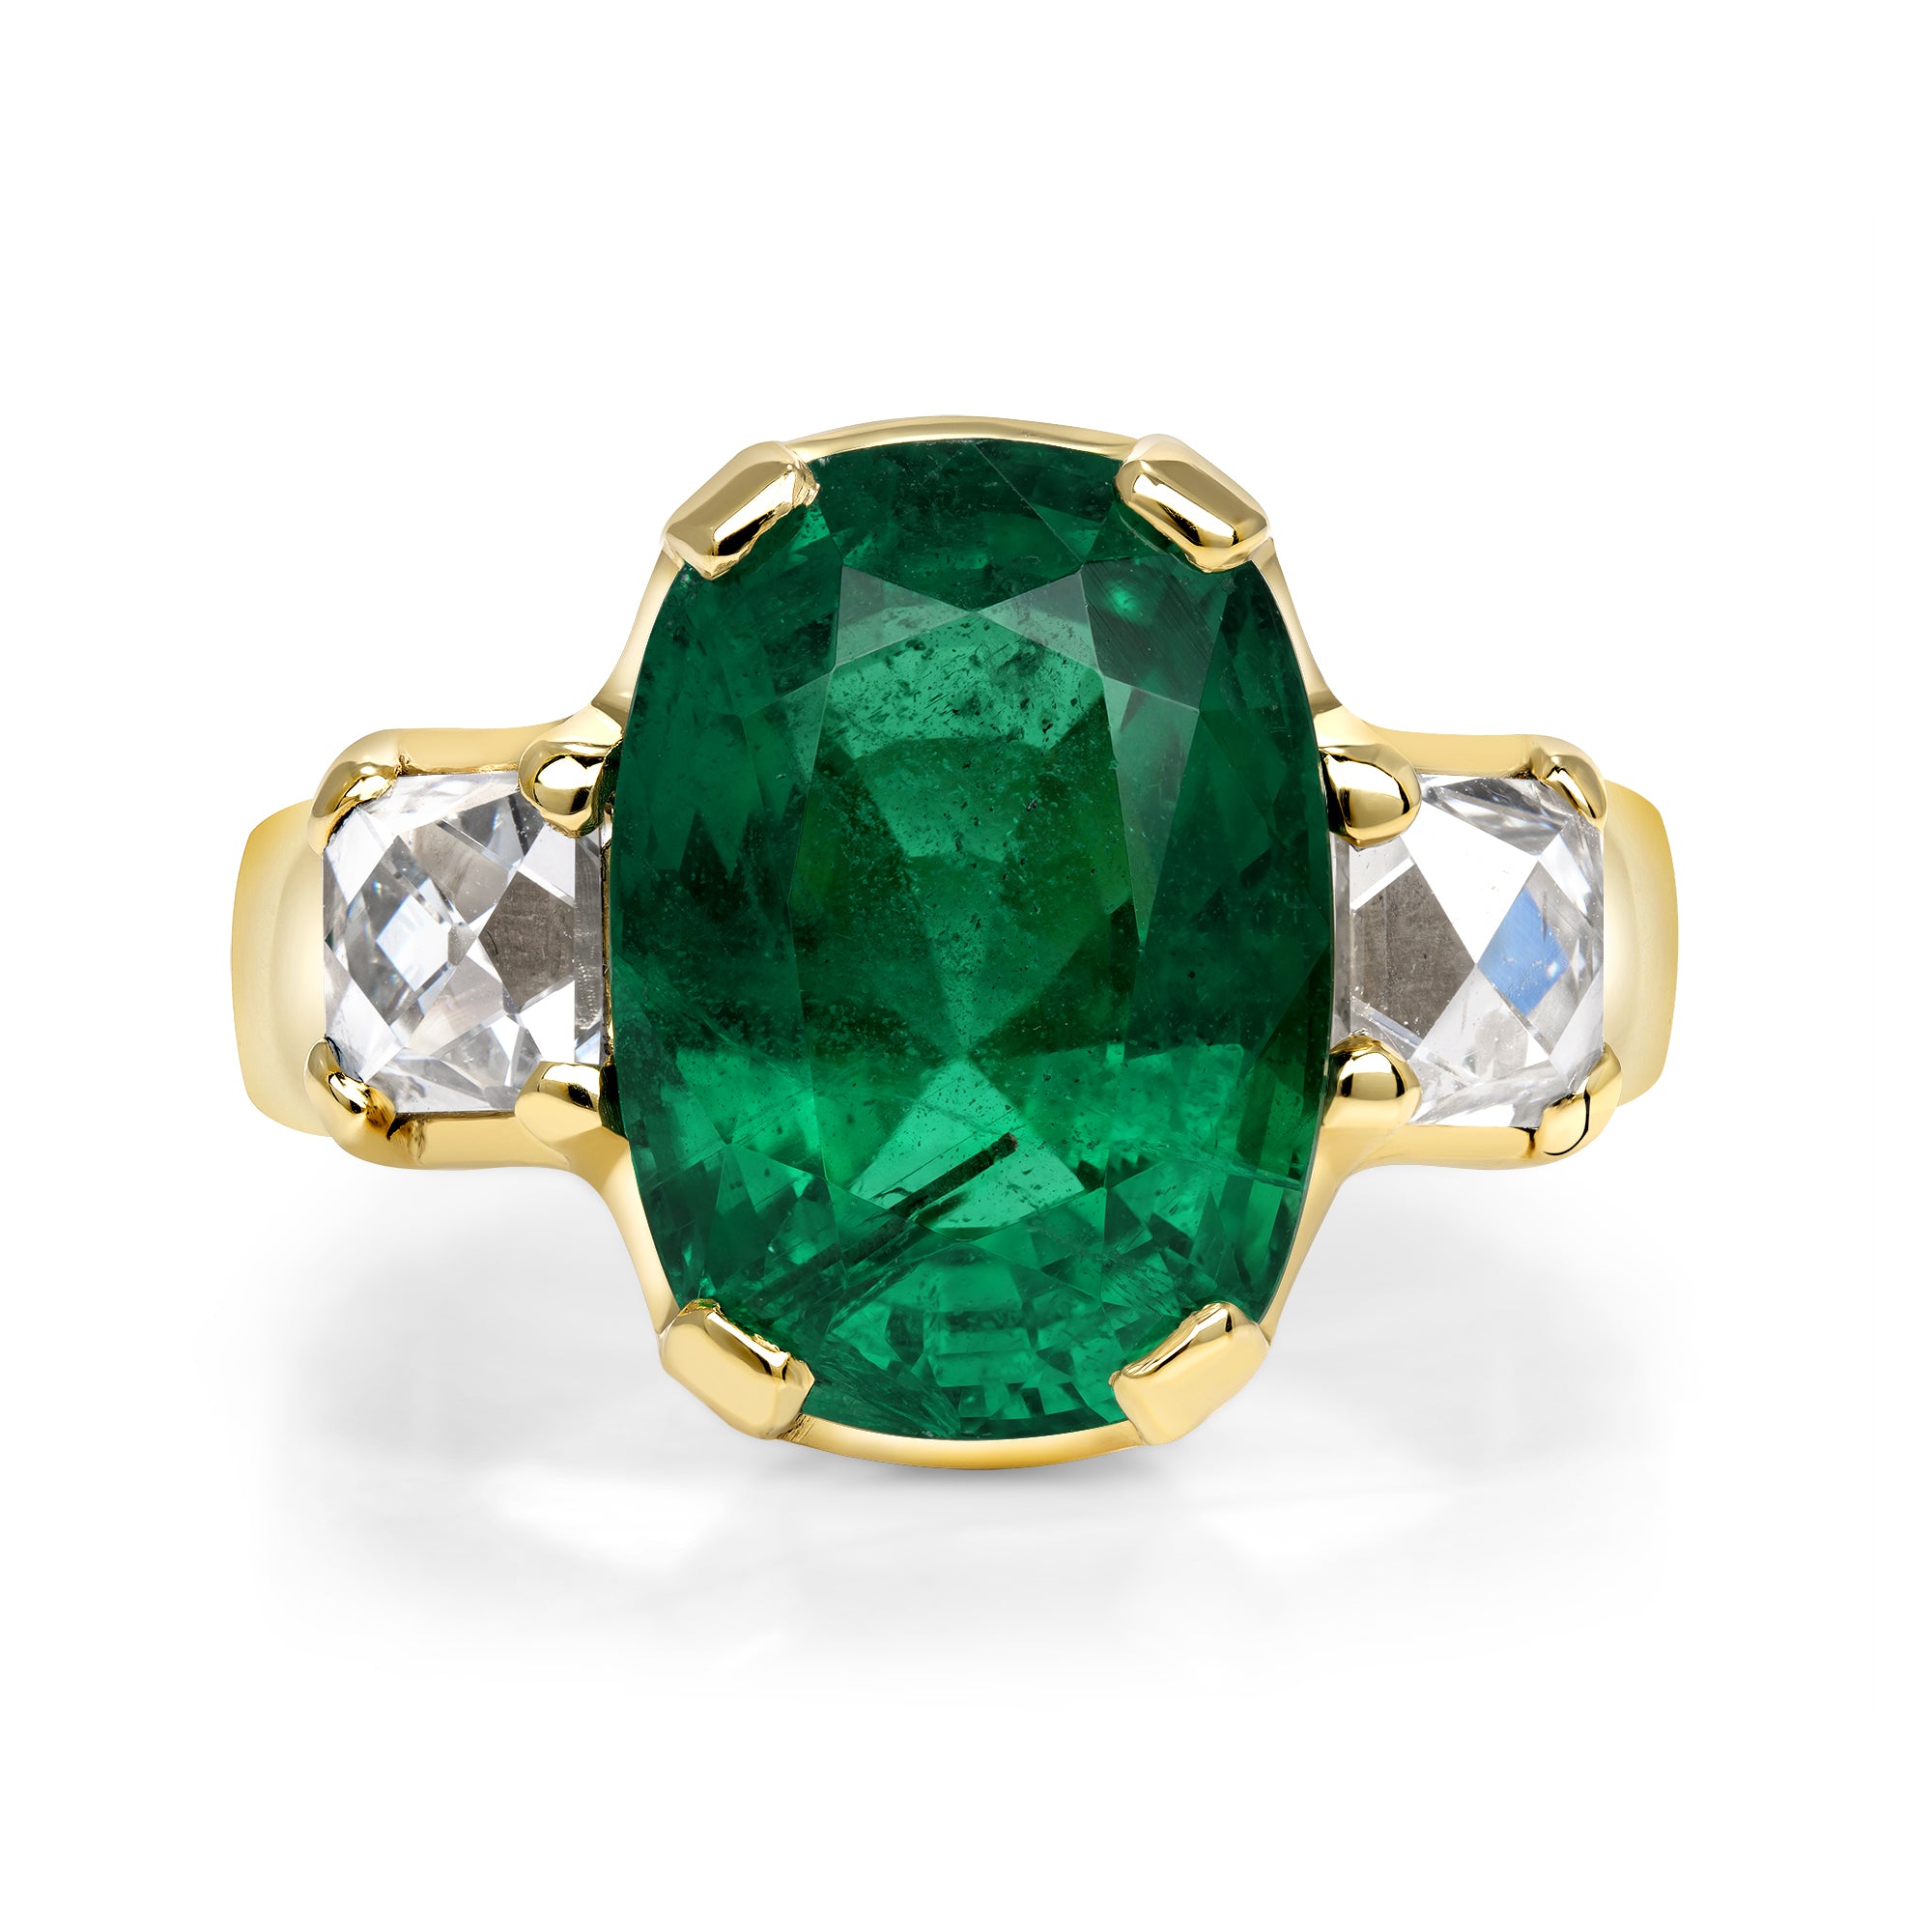 SINGLE STONE BROOKLYN RING featuring 6.08ct GIA certified Zambian cushion cut green emerald flanked by 1.61ctw GIA certified E-F/VS1 French cut diamonds prong set in a handcrafted 18K yellow gold mounting.